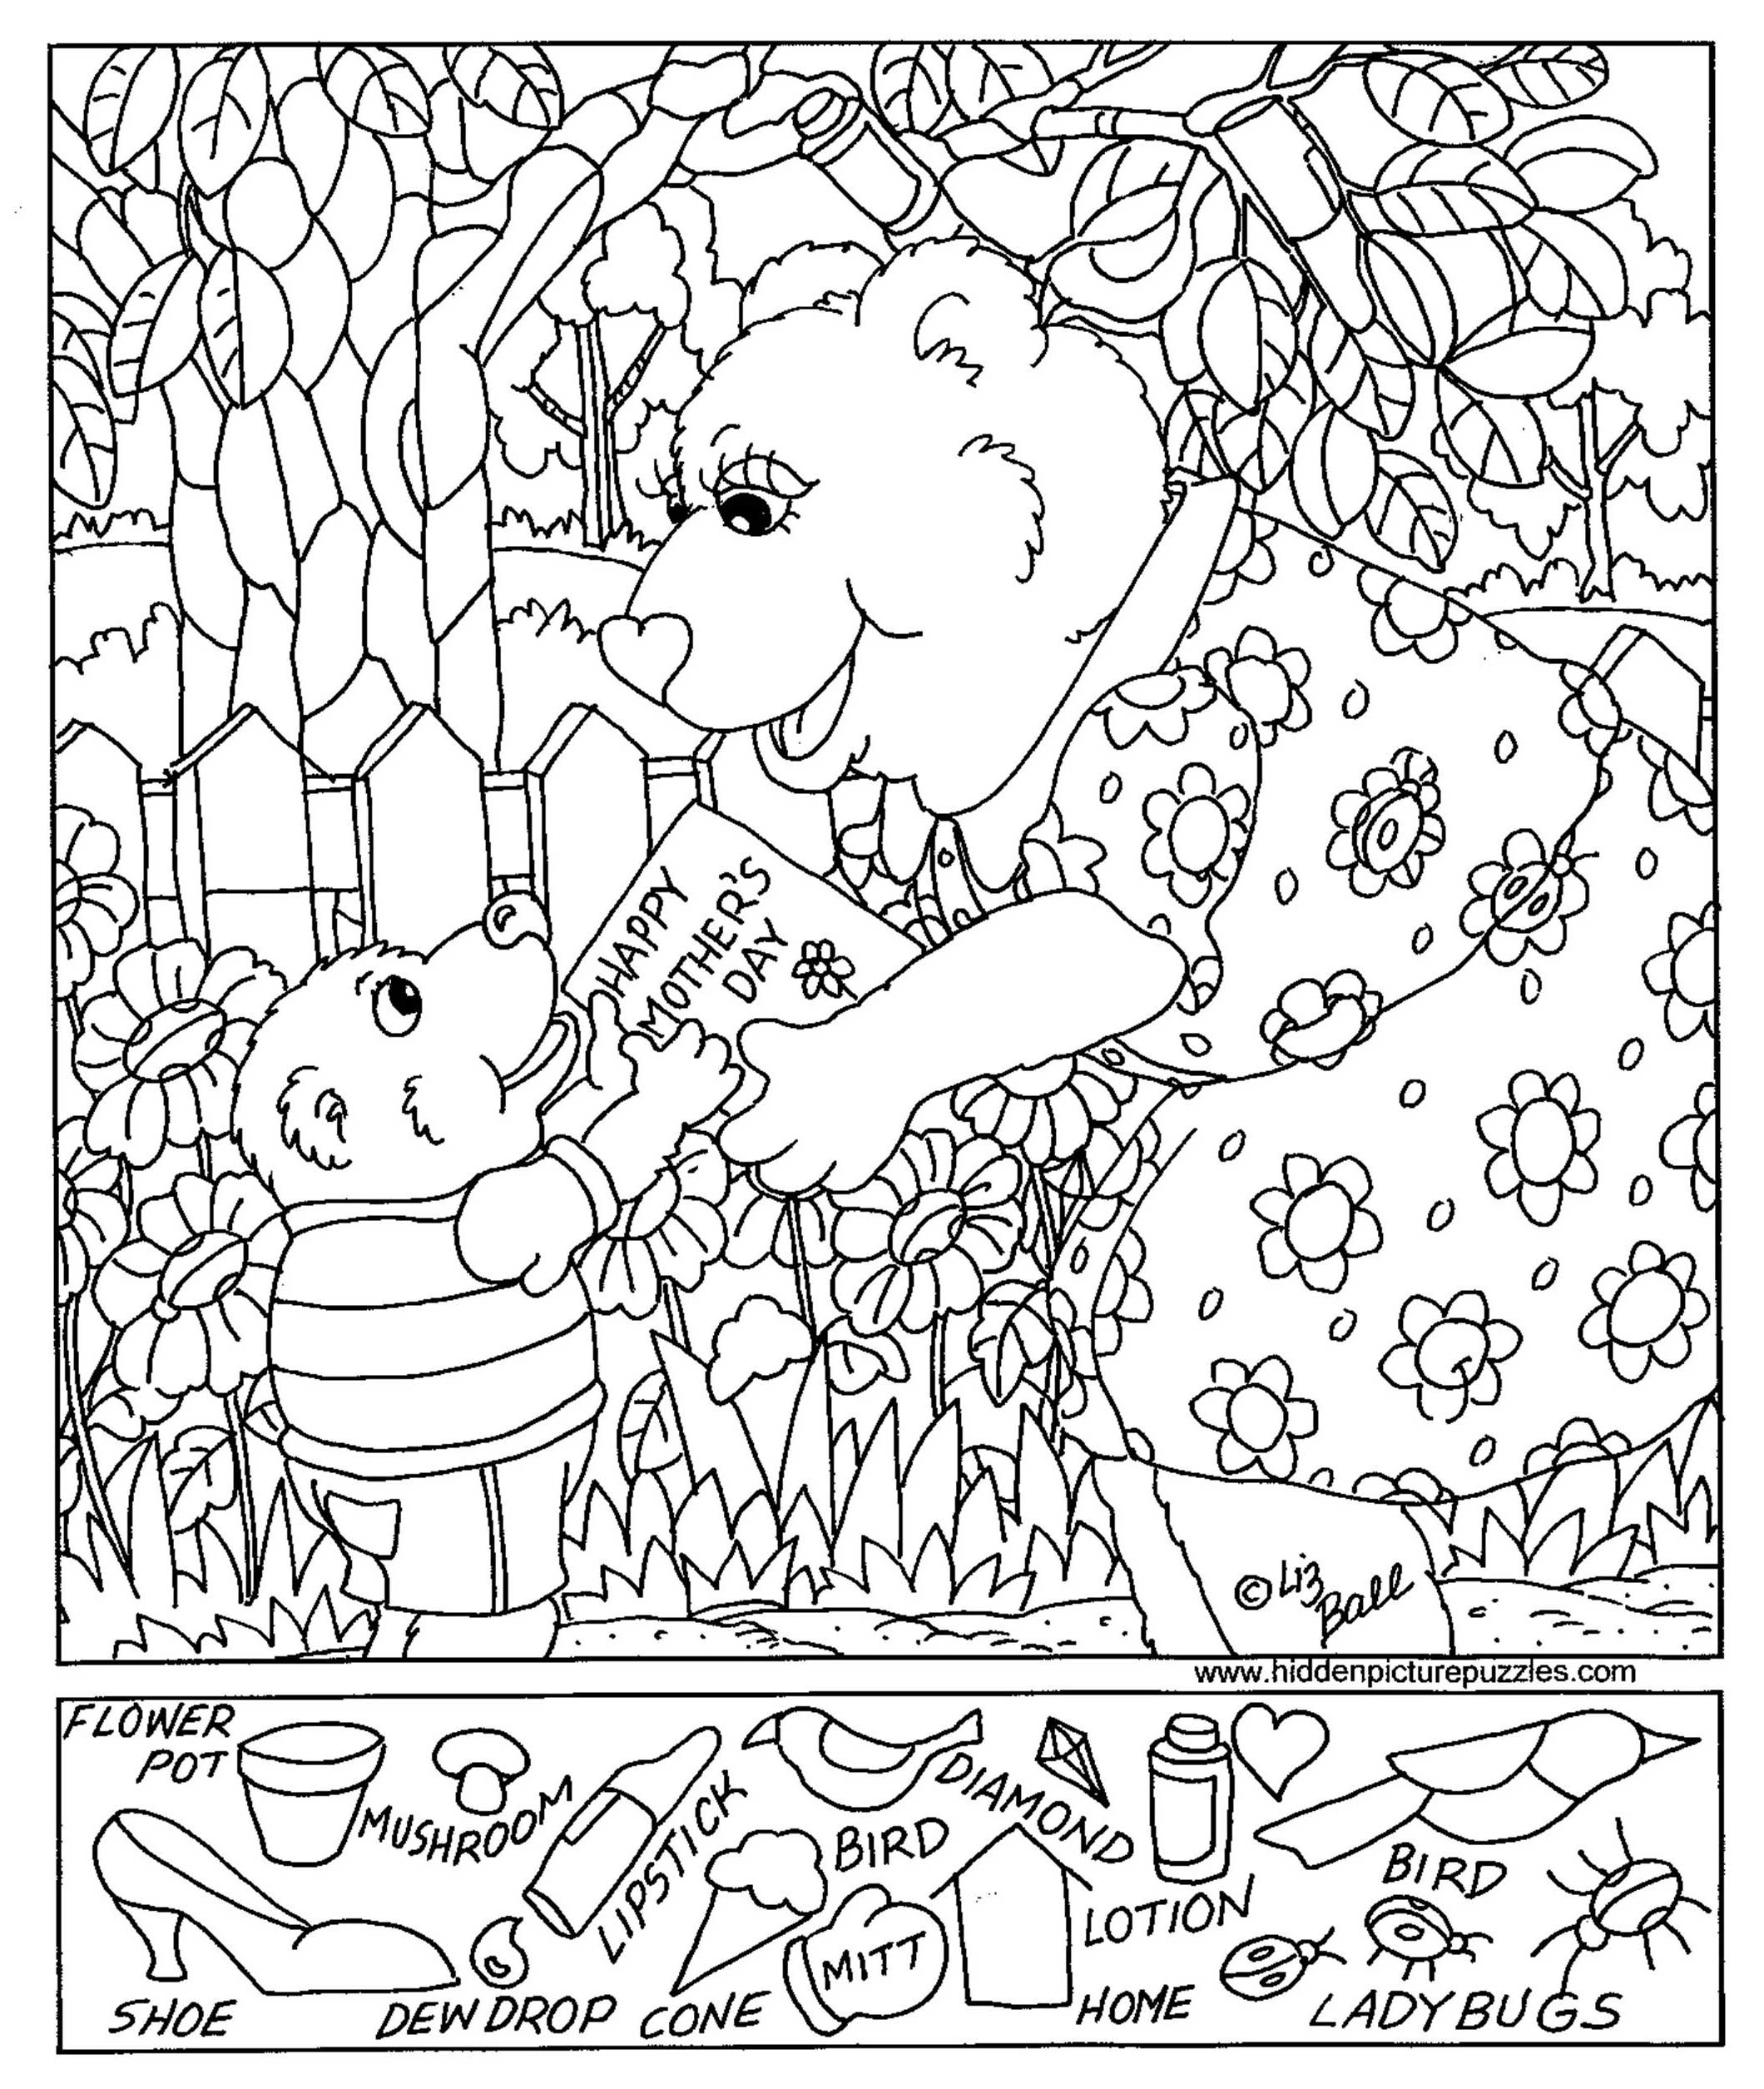 Coloring Page Hiddene Coloring Pages Free Printables Free Printable 